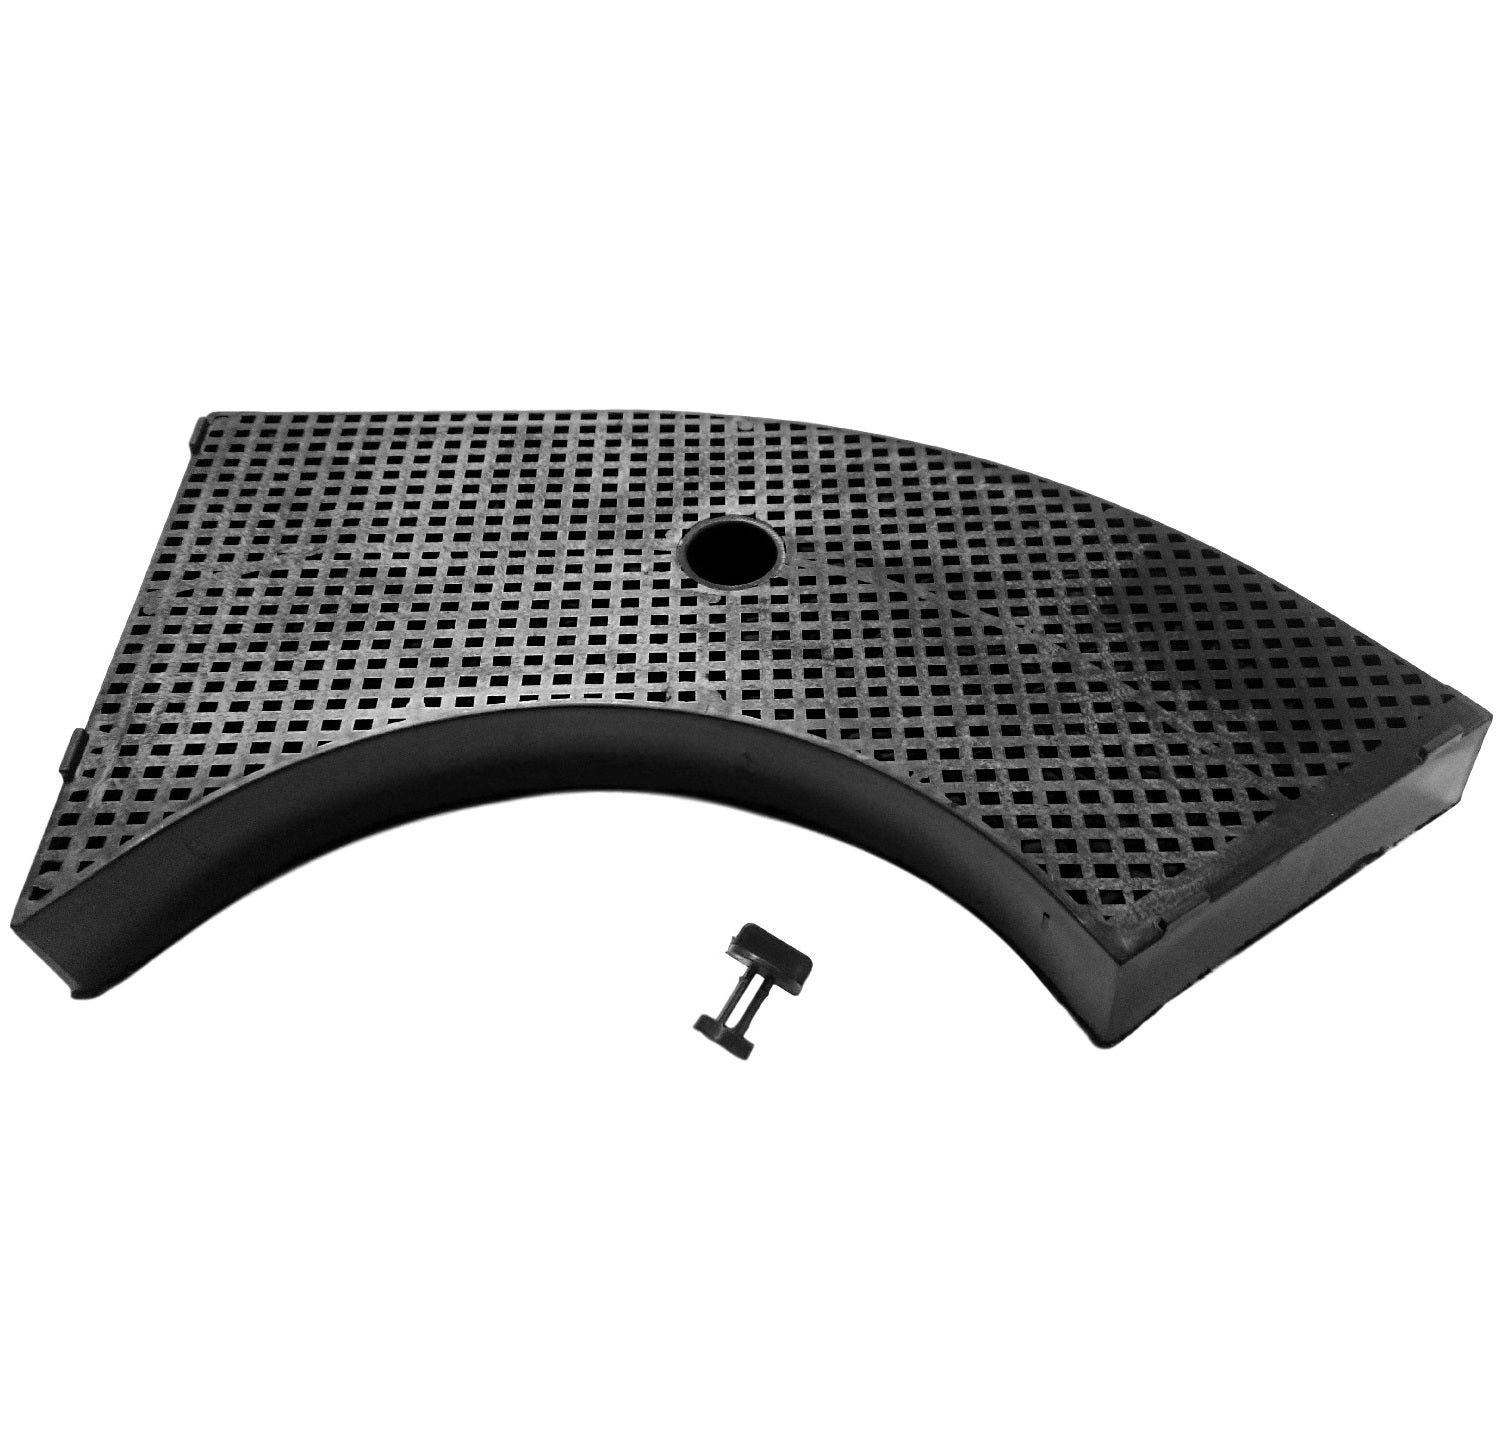 Wpro Compatible Amc859 Cooker Hood Carbon Filter - Type 10 Charcoal Filters